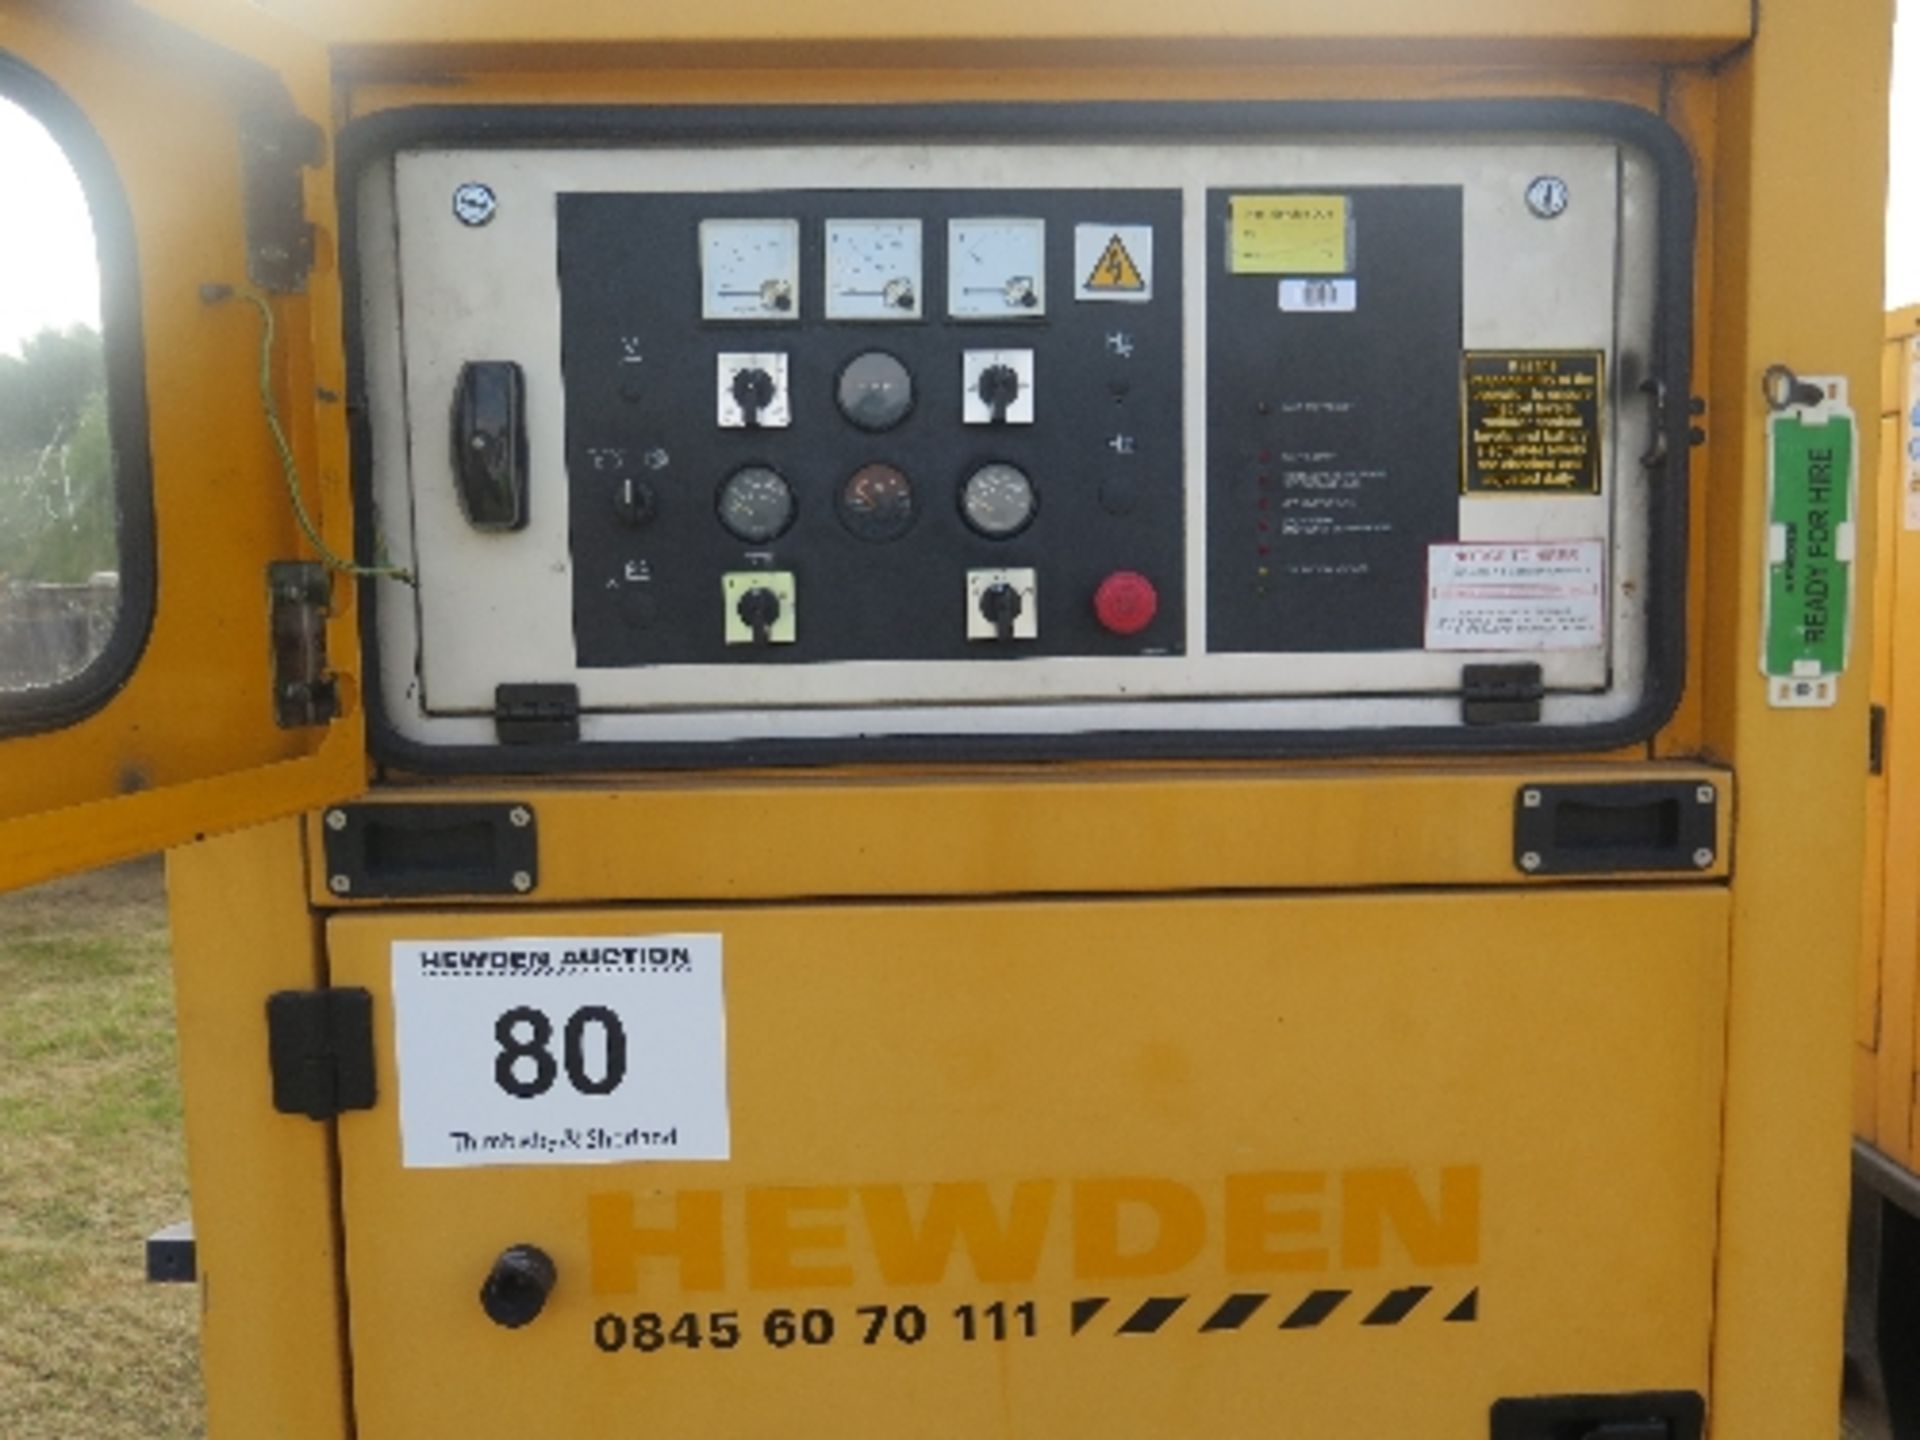 Caterpillar XQE45 generator 21460 hrs 157790
PERKINS - RUNS AND MAKES POWER
ALL LOTS are SOLD AS - Image 2 of 6